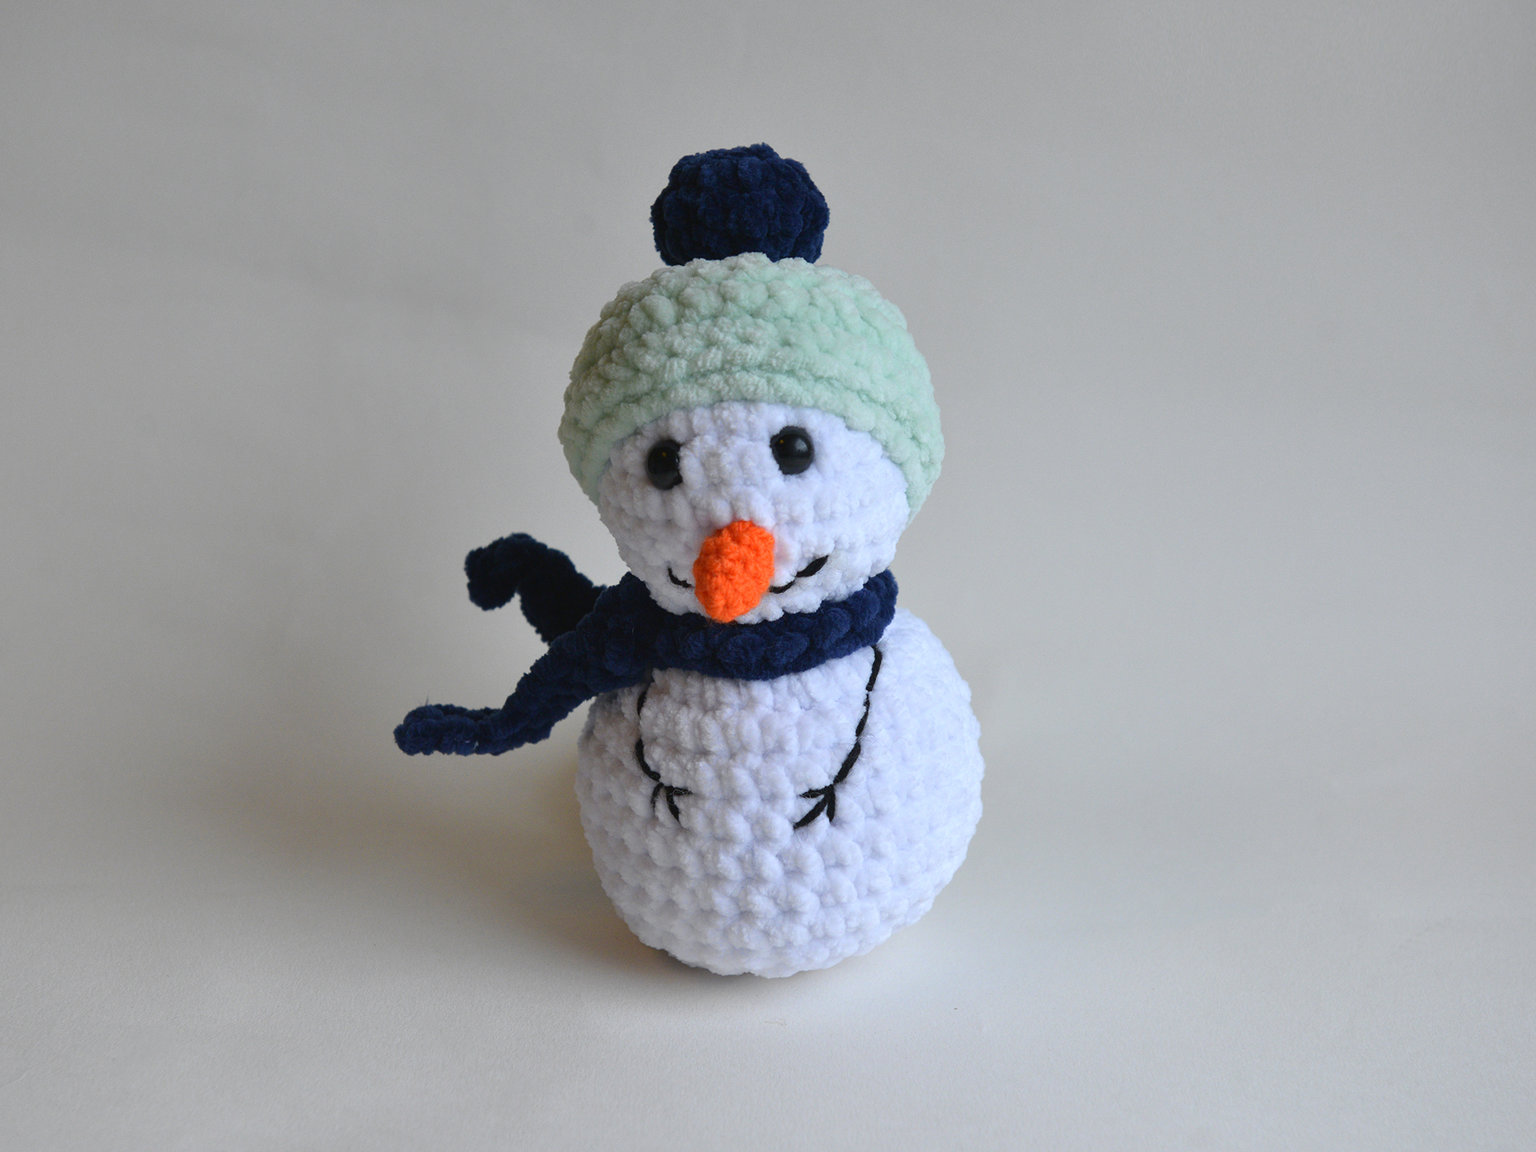 Hand-knitted snowman